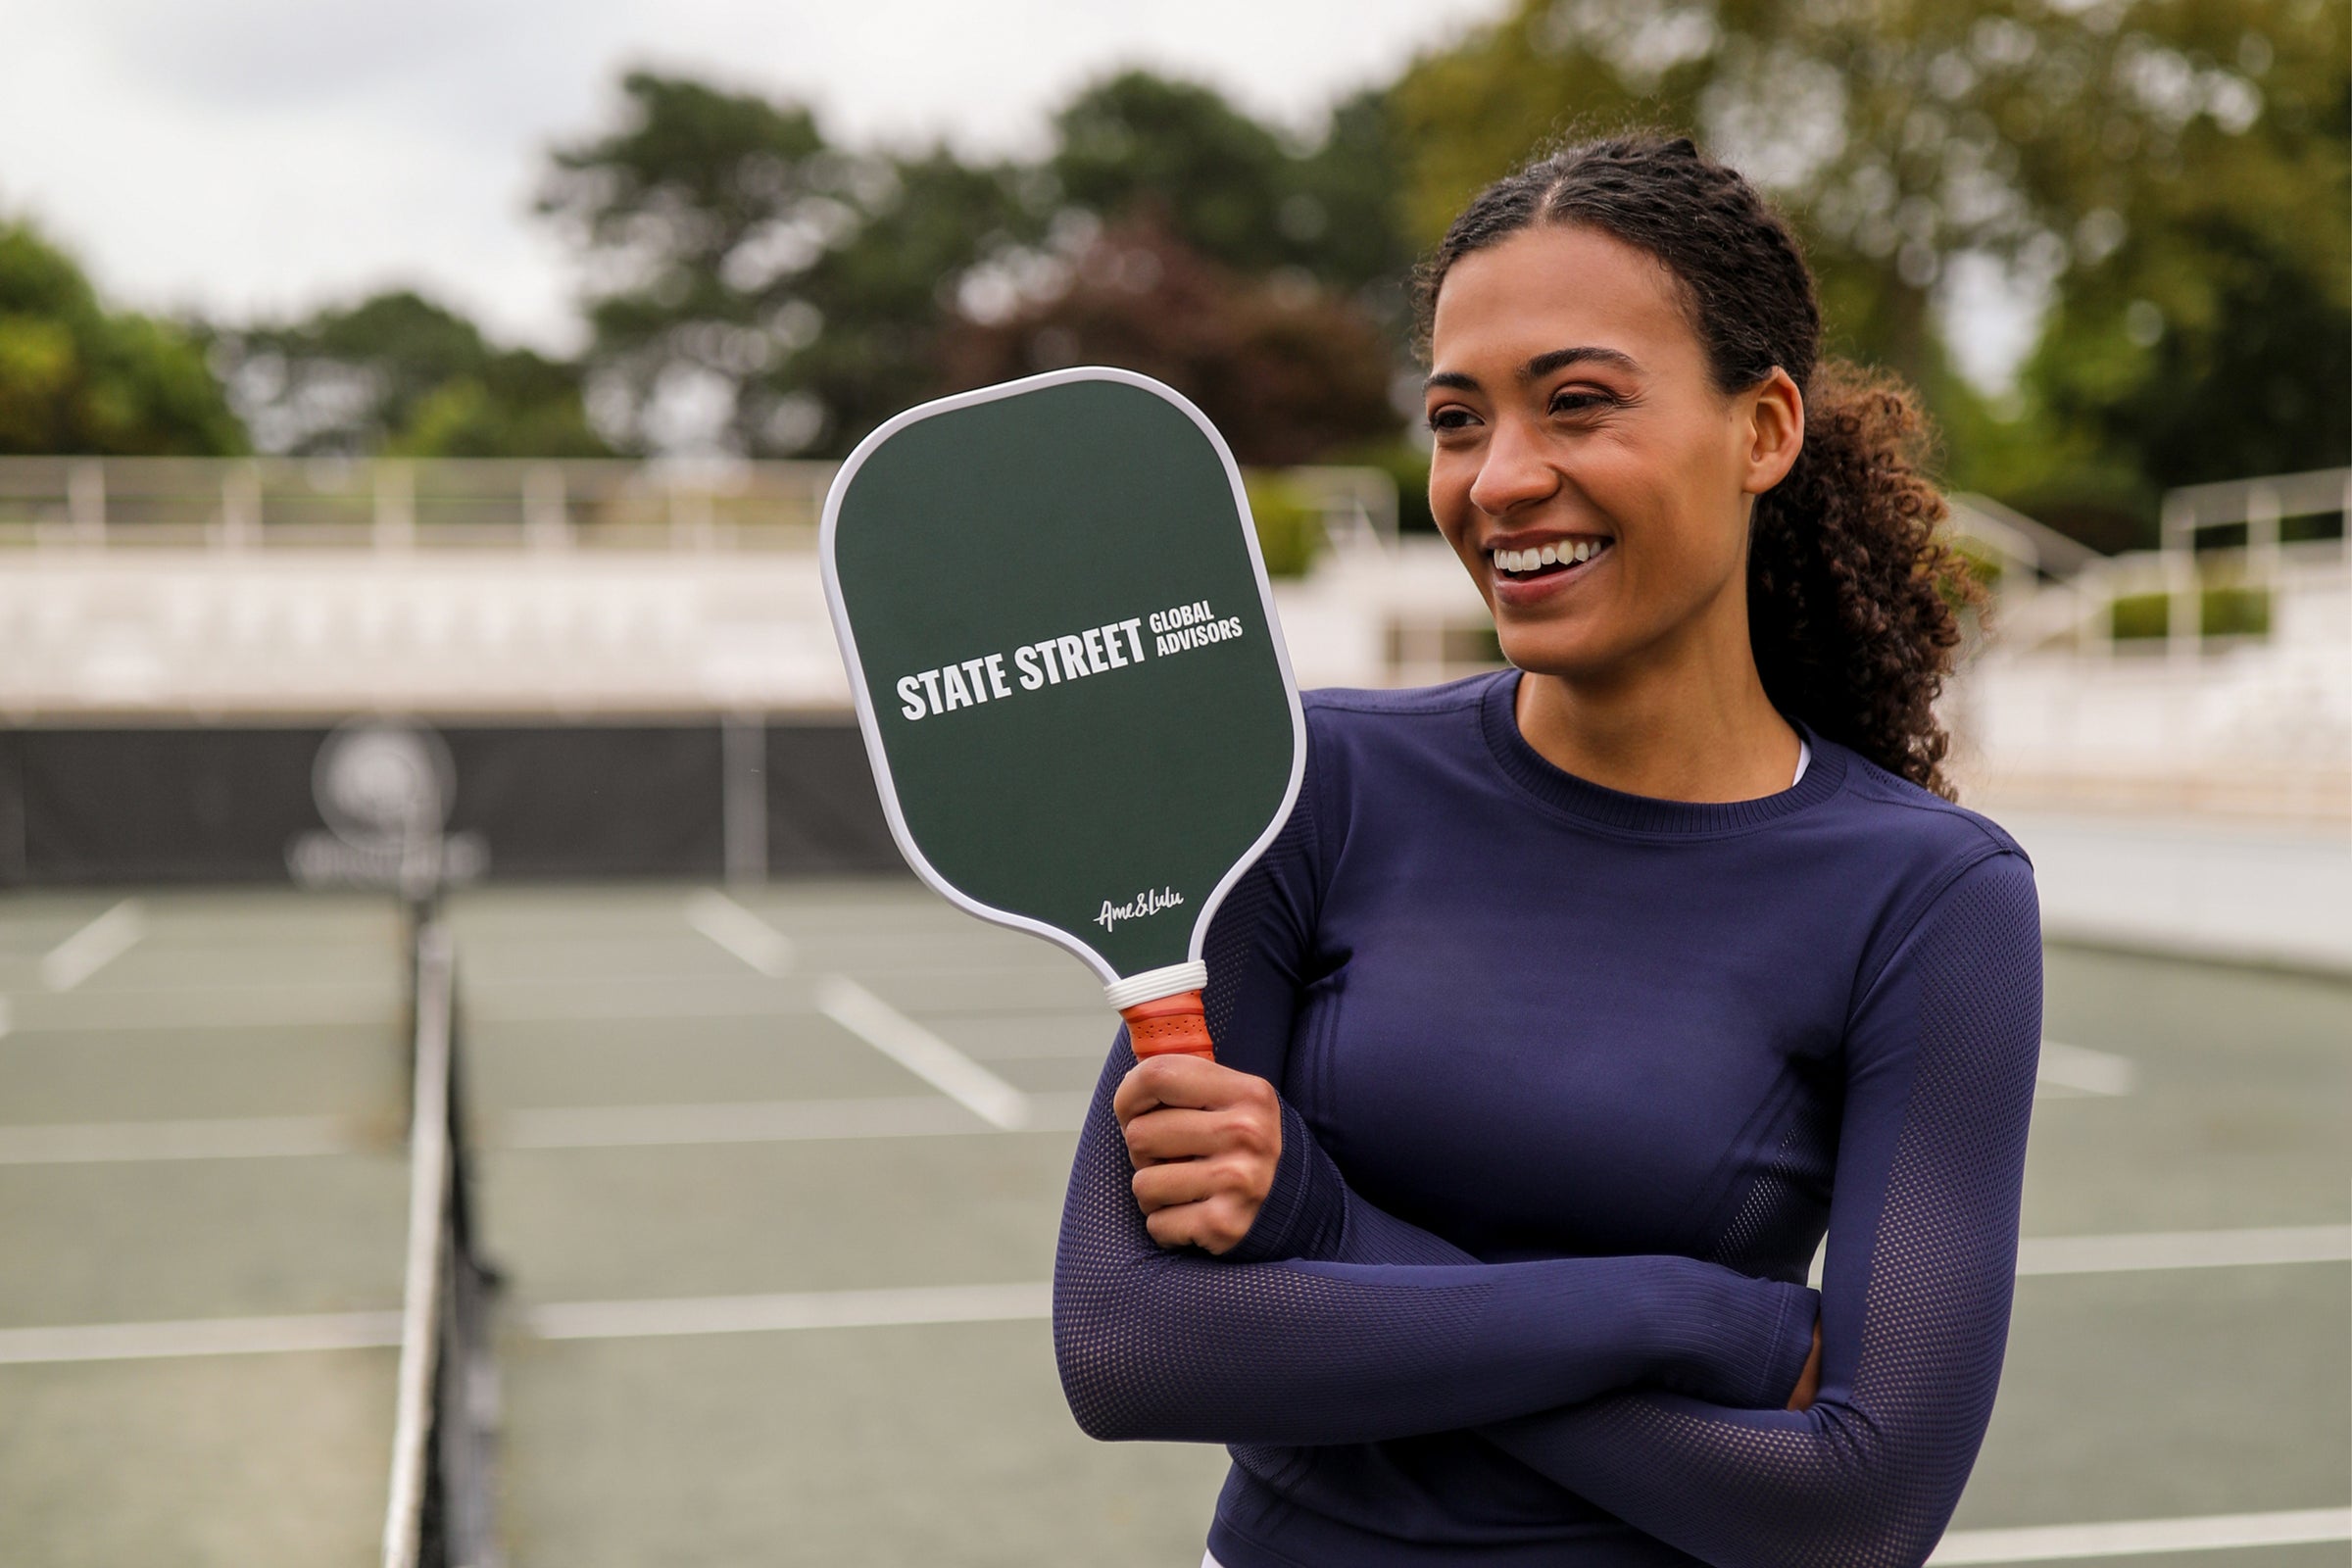 Smiling woman with a state street tennis paddle on a court exudes positivity.